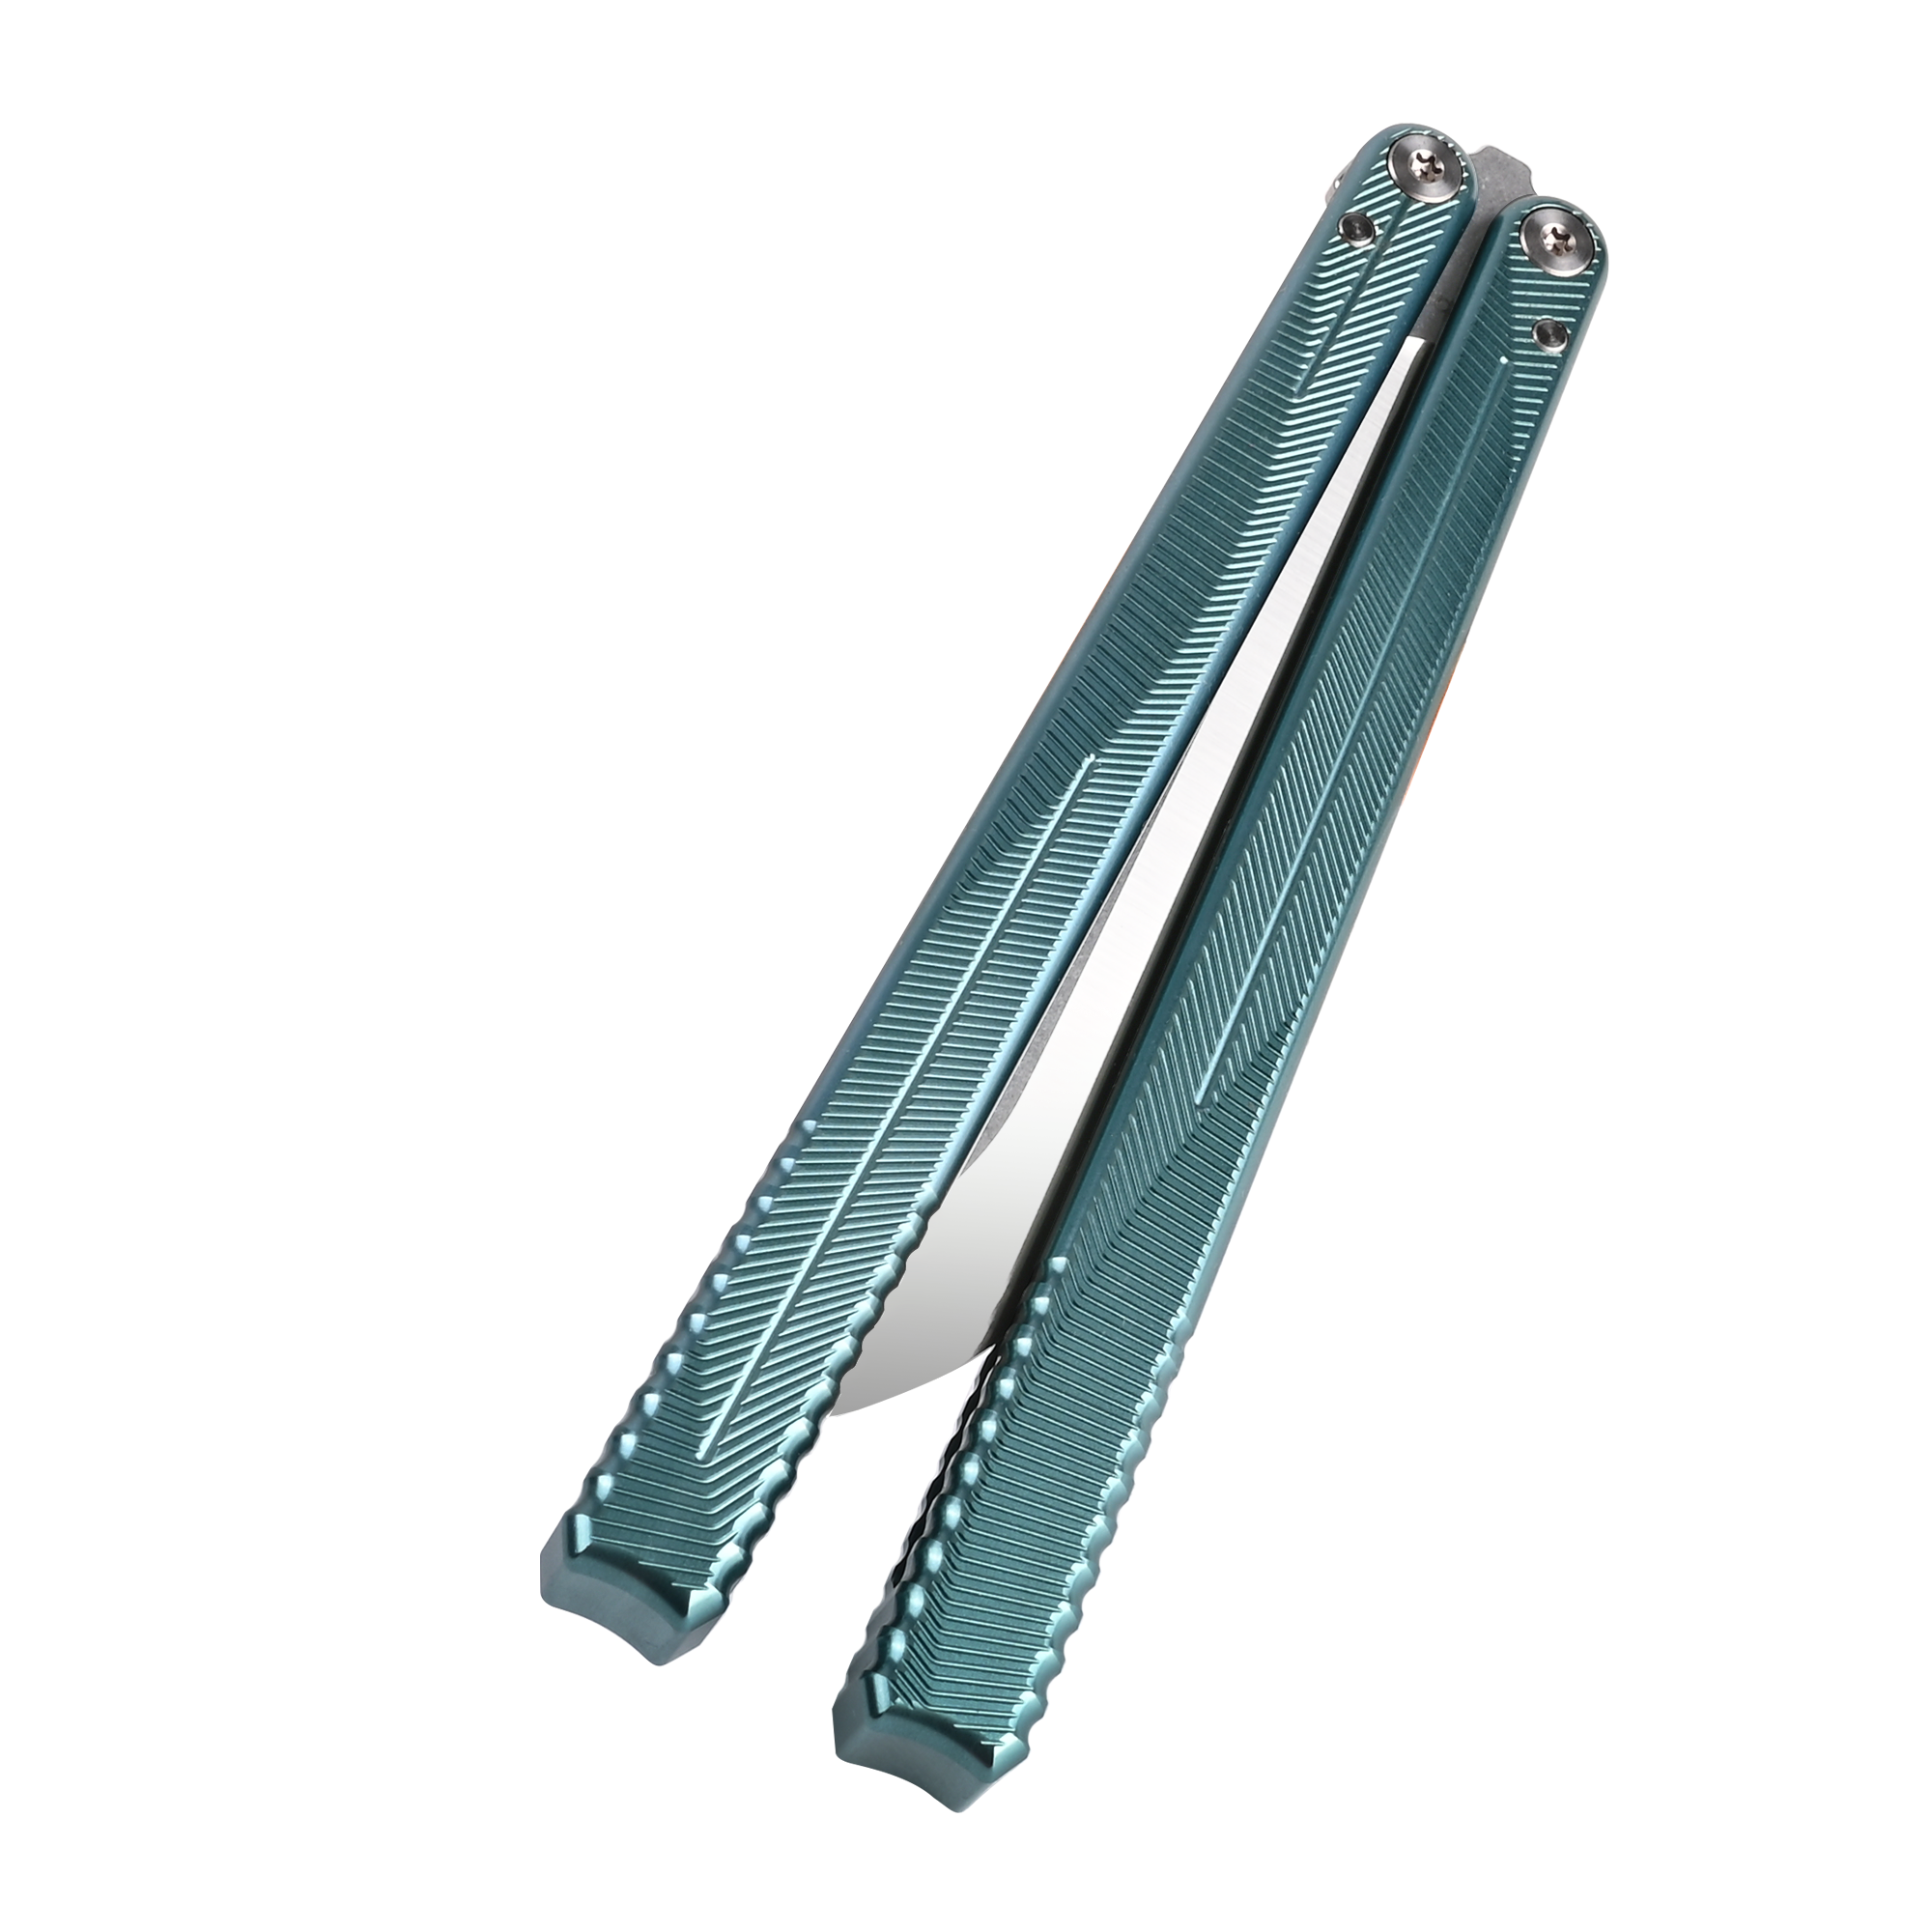 Nabalils Hydra Butterfly Knife Balisong Trainer Dull Blade-Teal-Closed-1